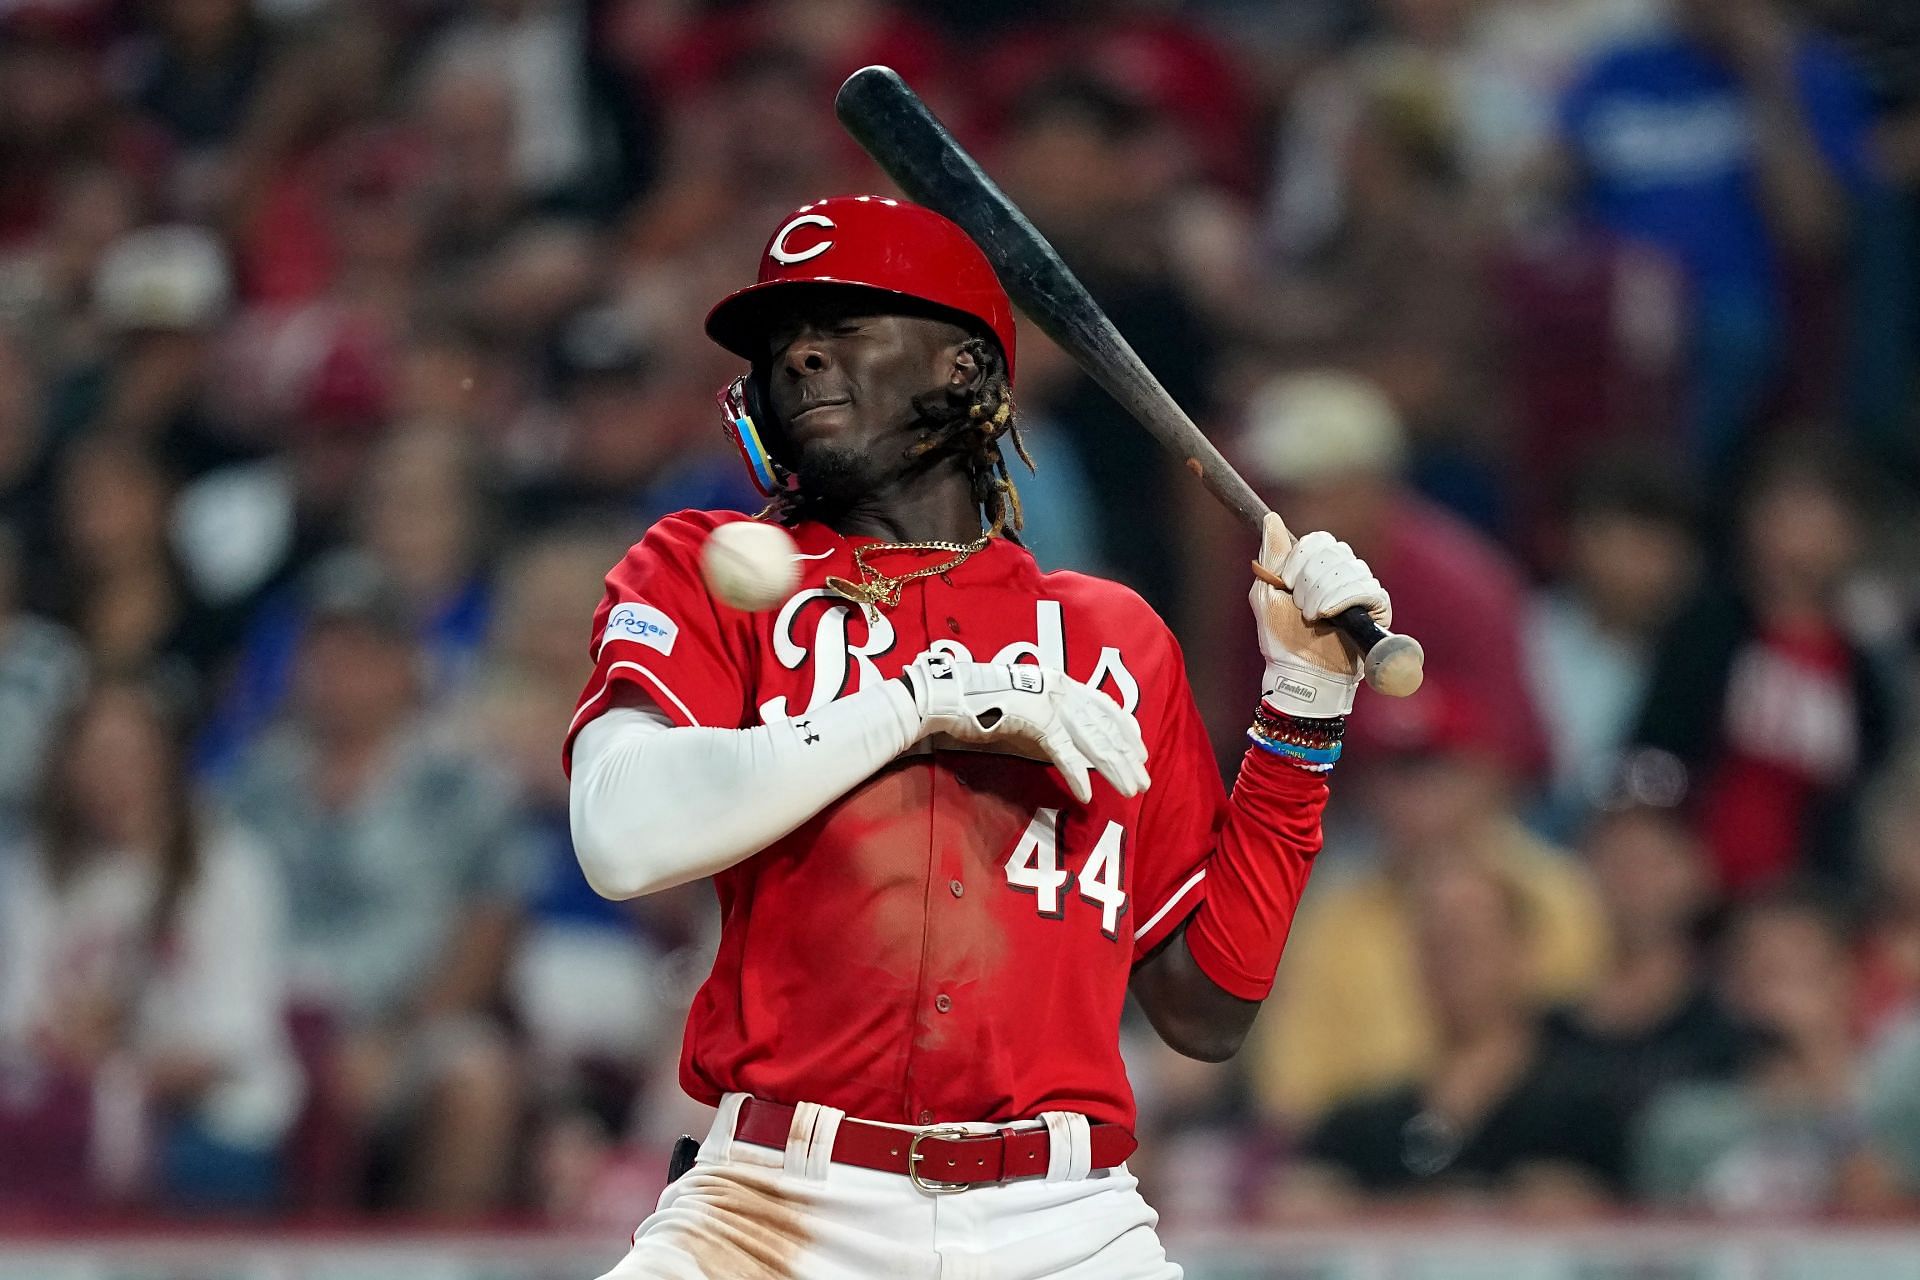 Elly De La Cruz #44 of the Cincinnati Reds ducks an inside pitch in the seventh inning against the Los Angeles Dodgers at Great American Ball Park on June 07, 2023 in Cincinnati, Ohio. (Photo by Dylan Buell/Getty Images)